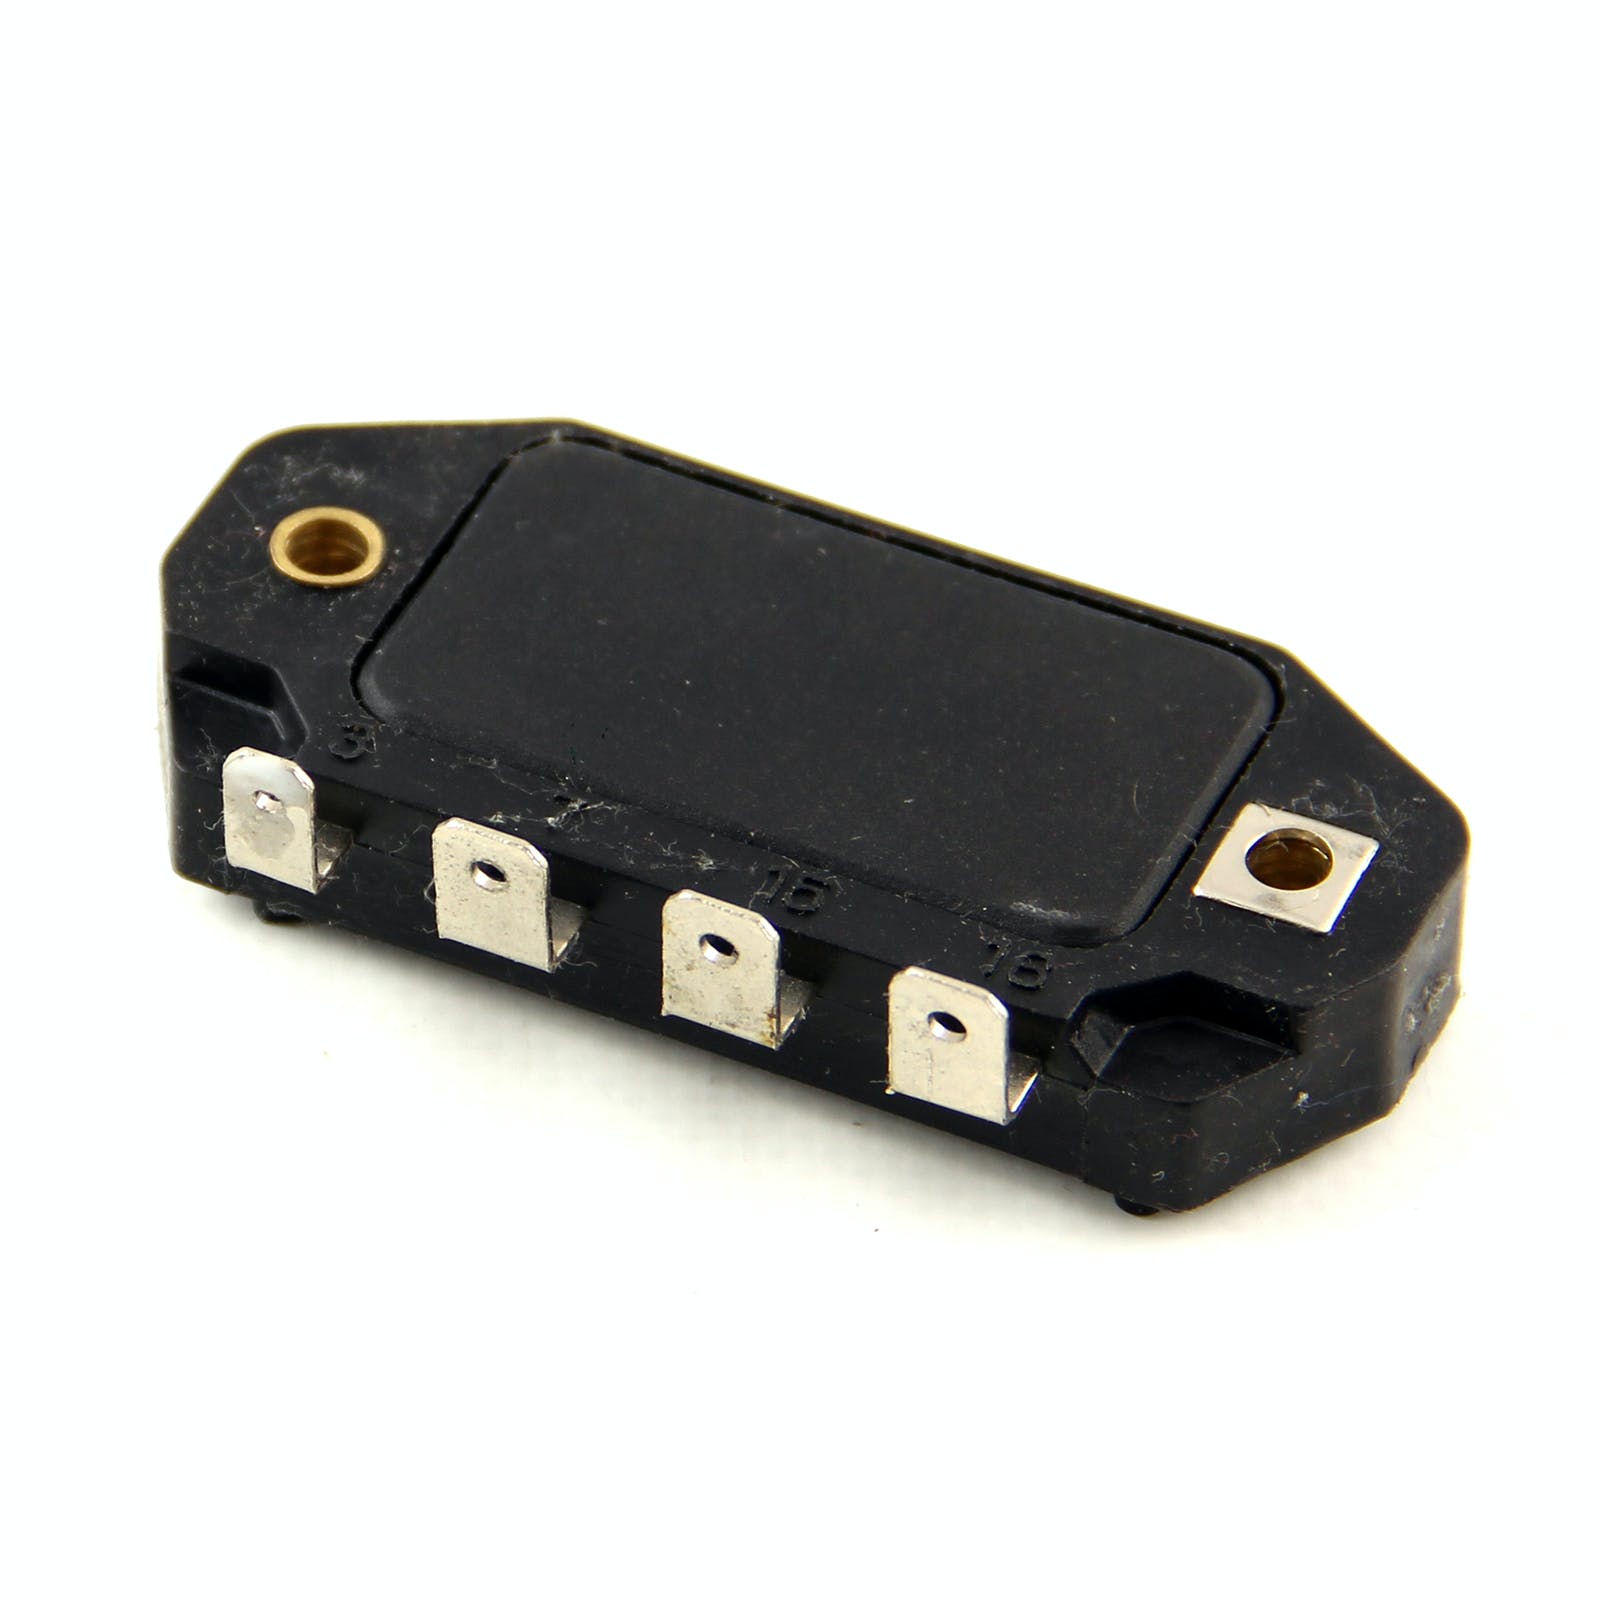 Speedmaster PCE383.1002 HEI Distributor 4 Pin Magnetic Pickup Ignition Control Module (Suits Pc7000)